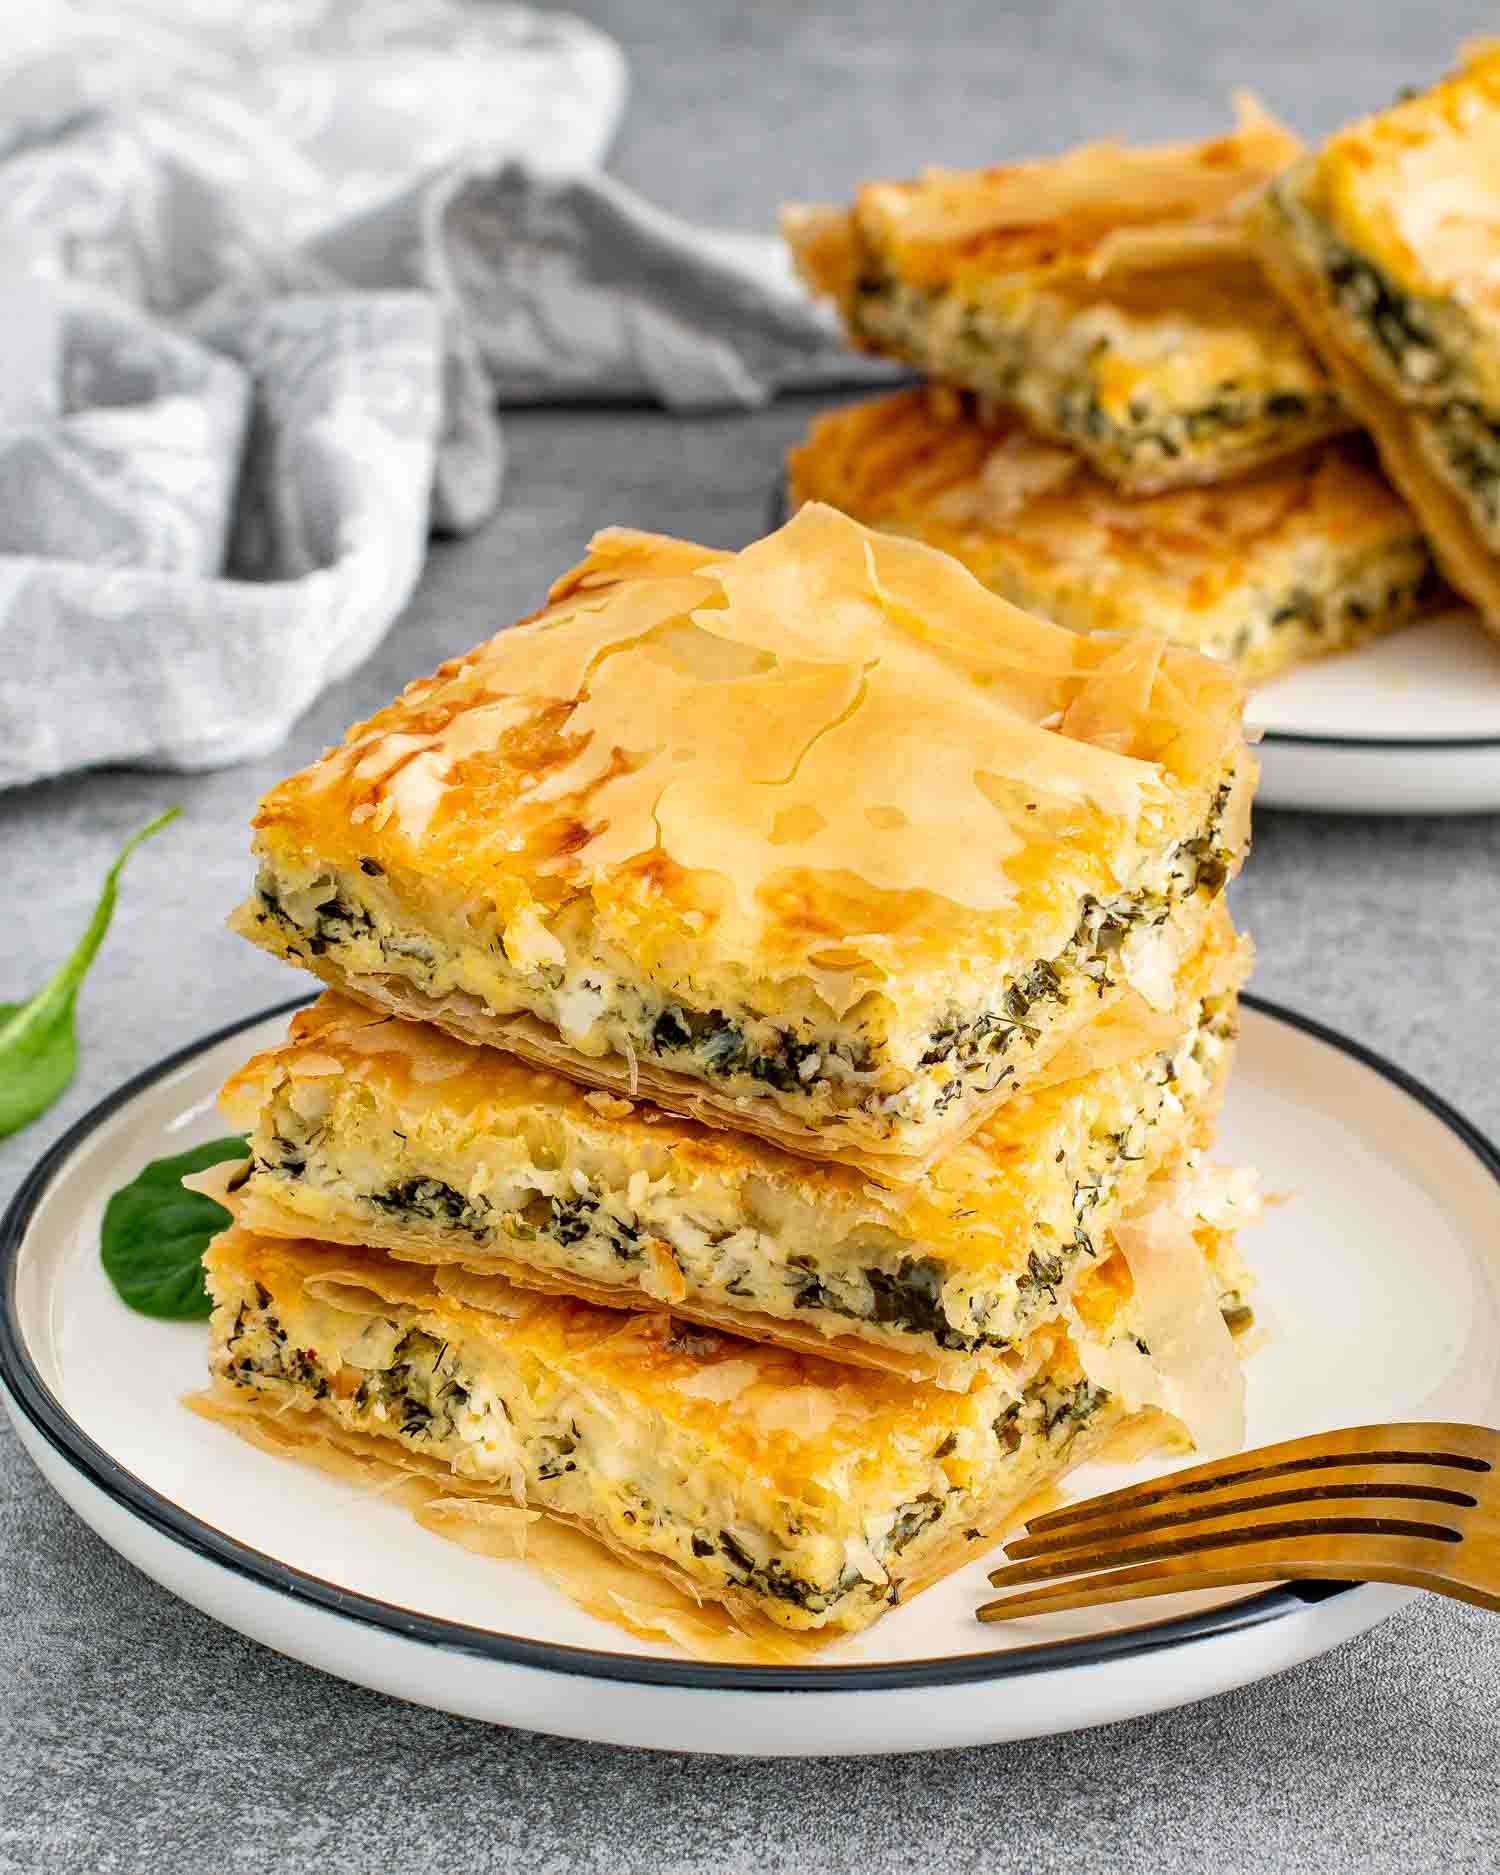 Stacked spanakopita slices on a plate with a fork, ready to eat.